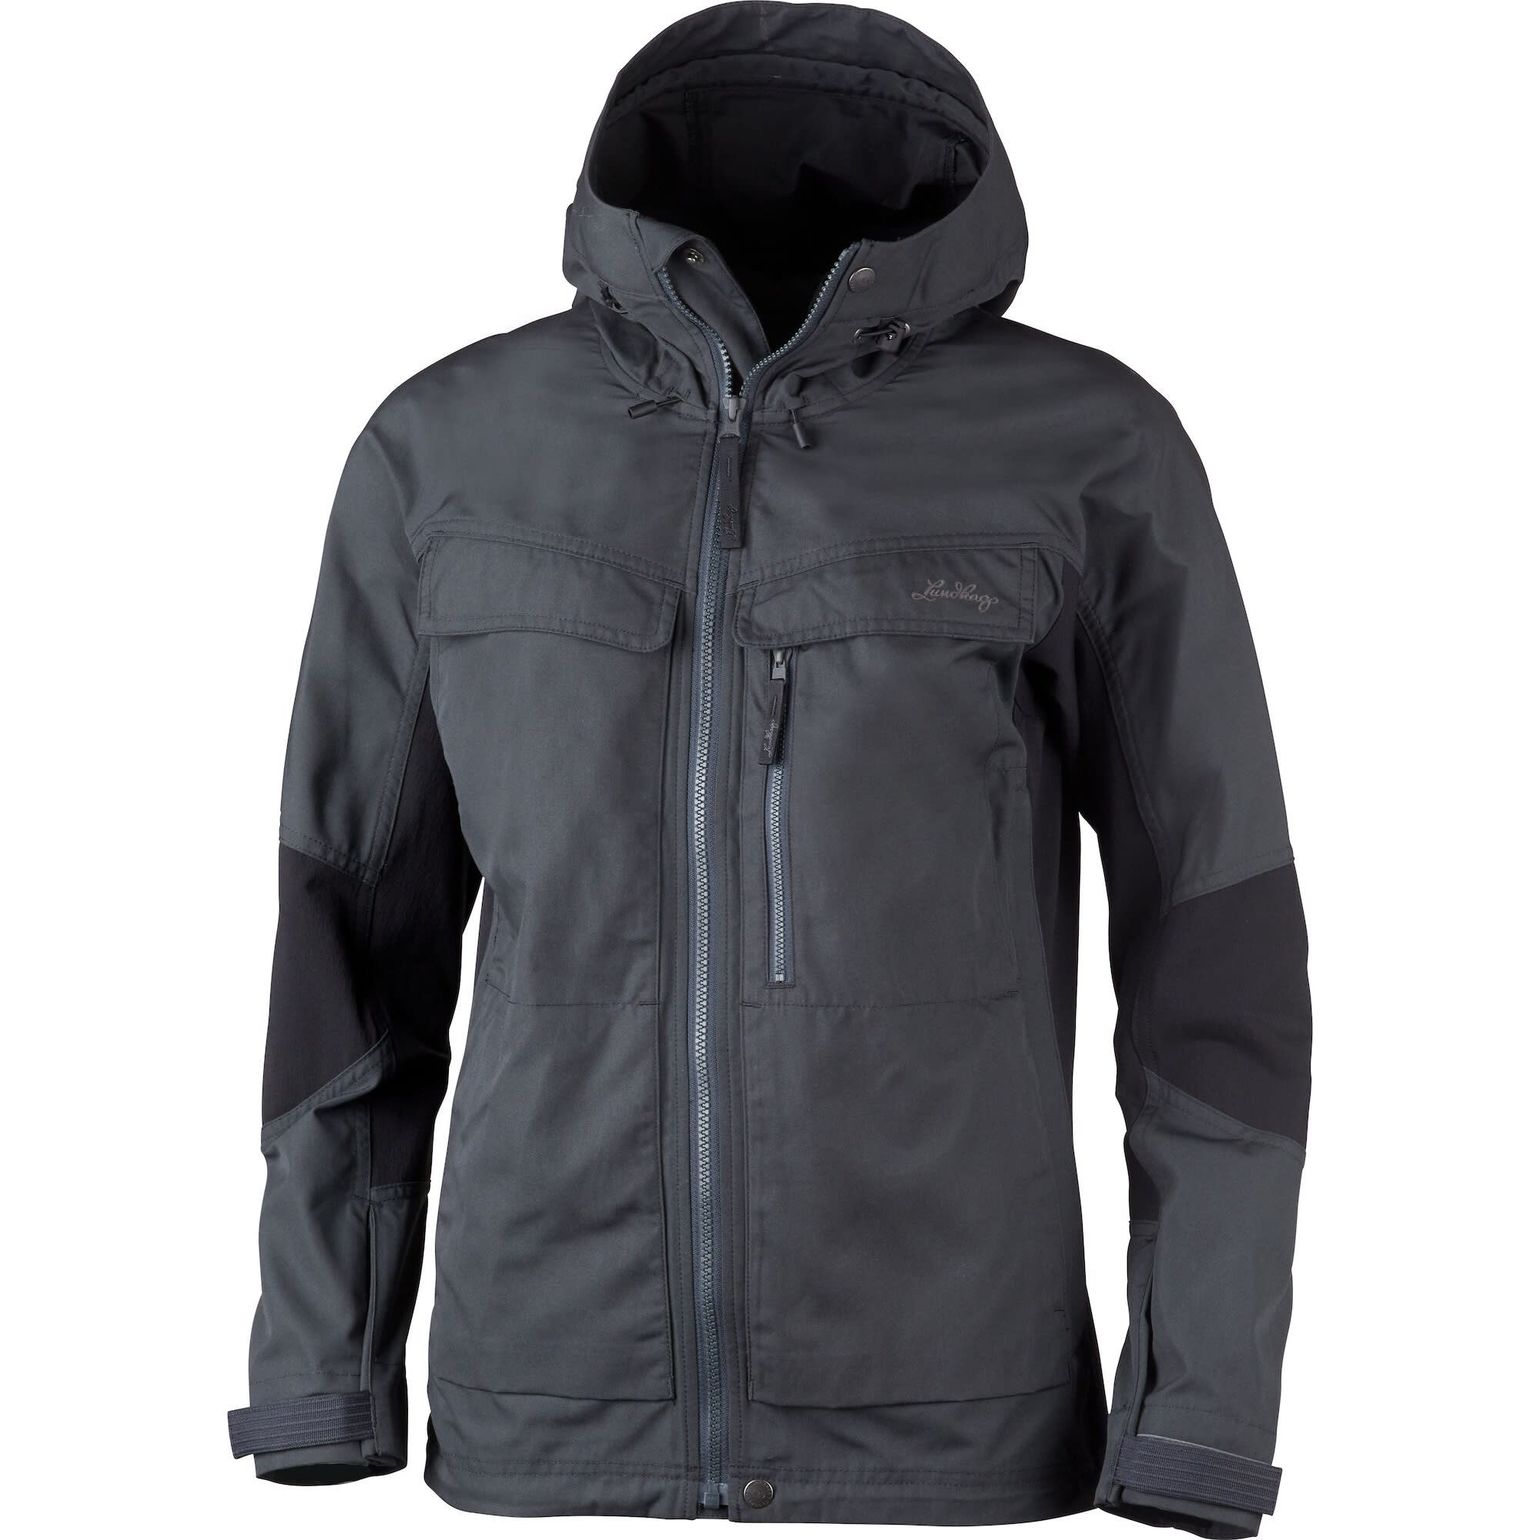 Lundhags Women's Authentic Jacket Charcoal/Black